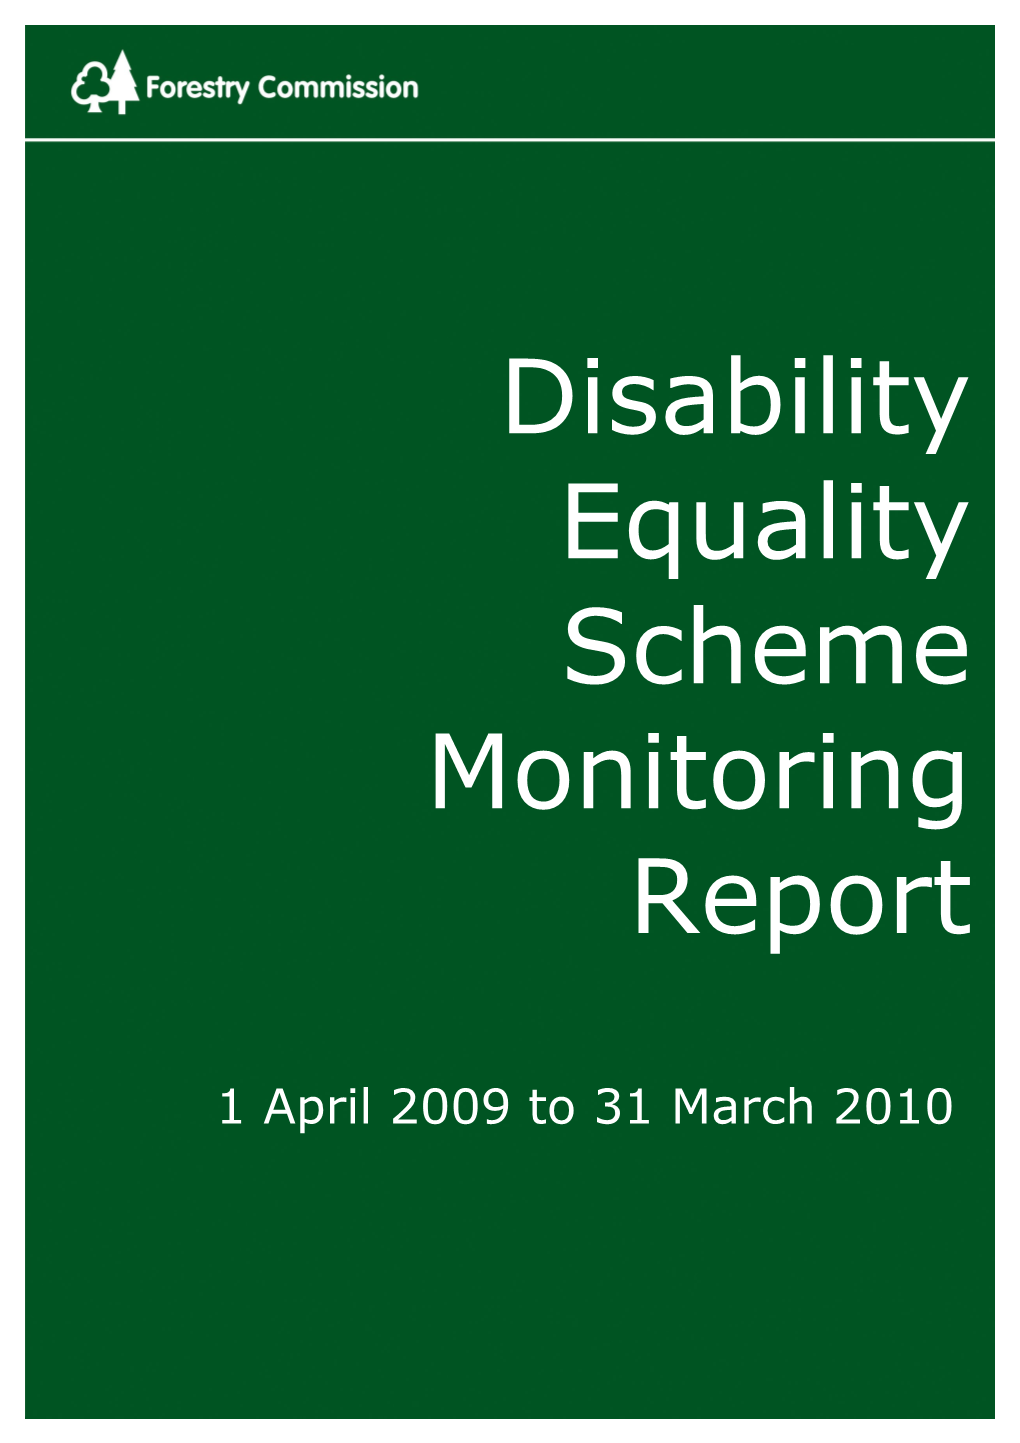 The FC S Disability Equality Monitoring Report for the Period 1 April 2009 to 31 March 2010